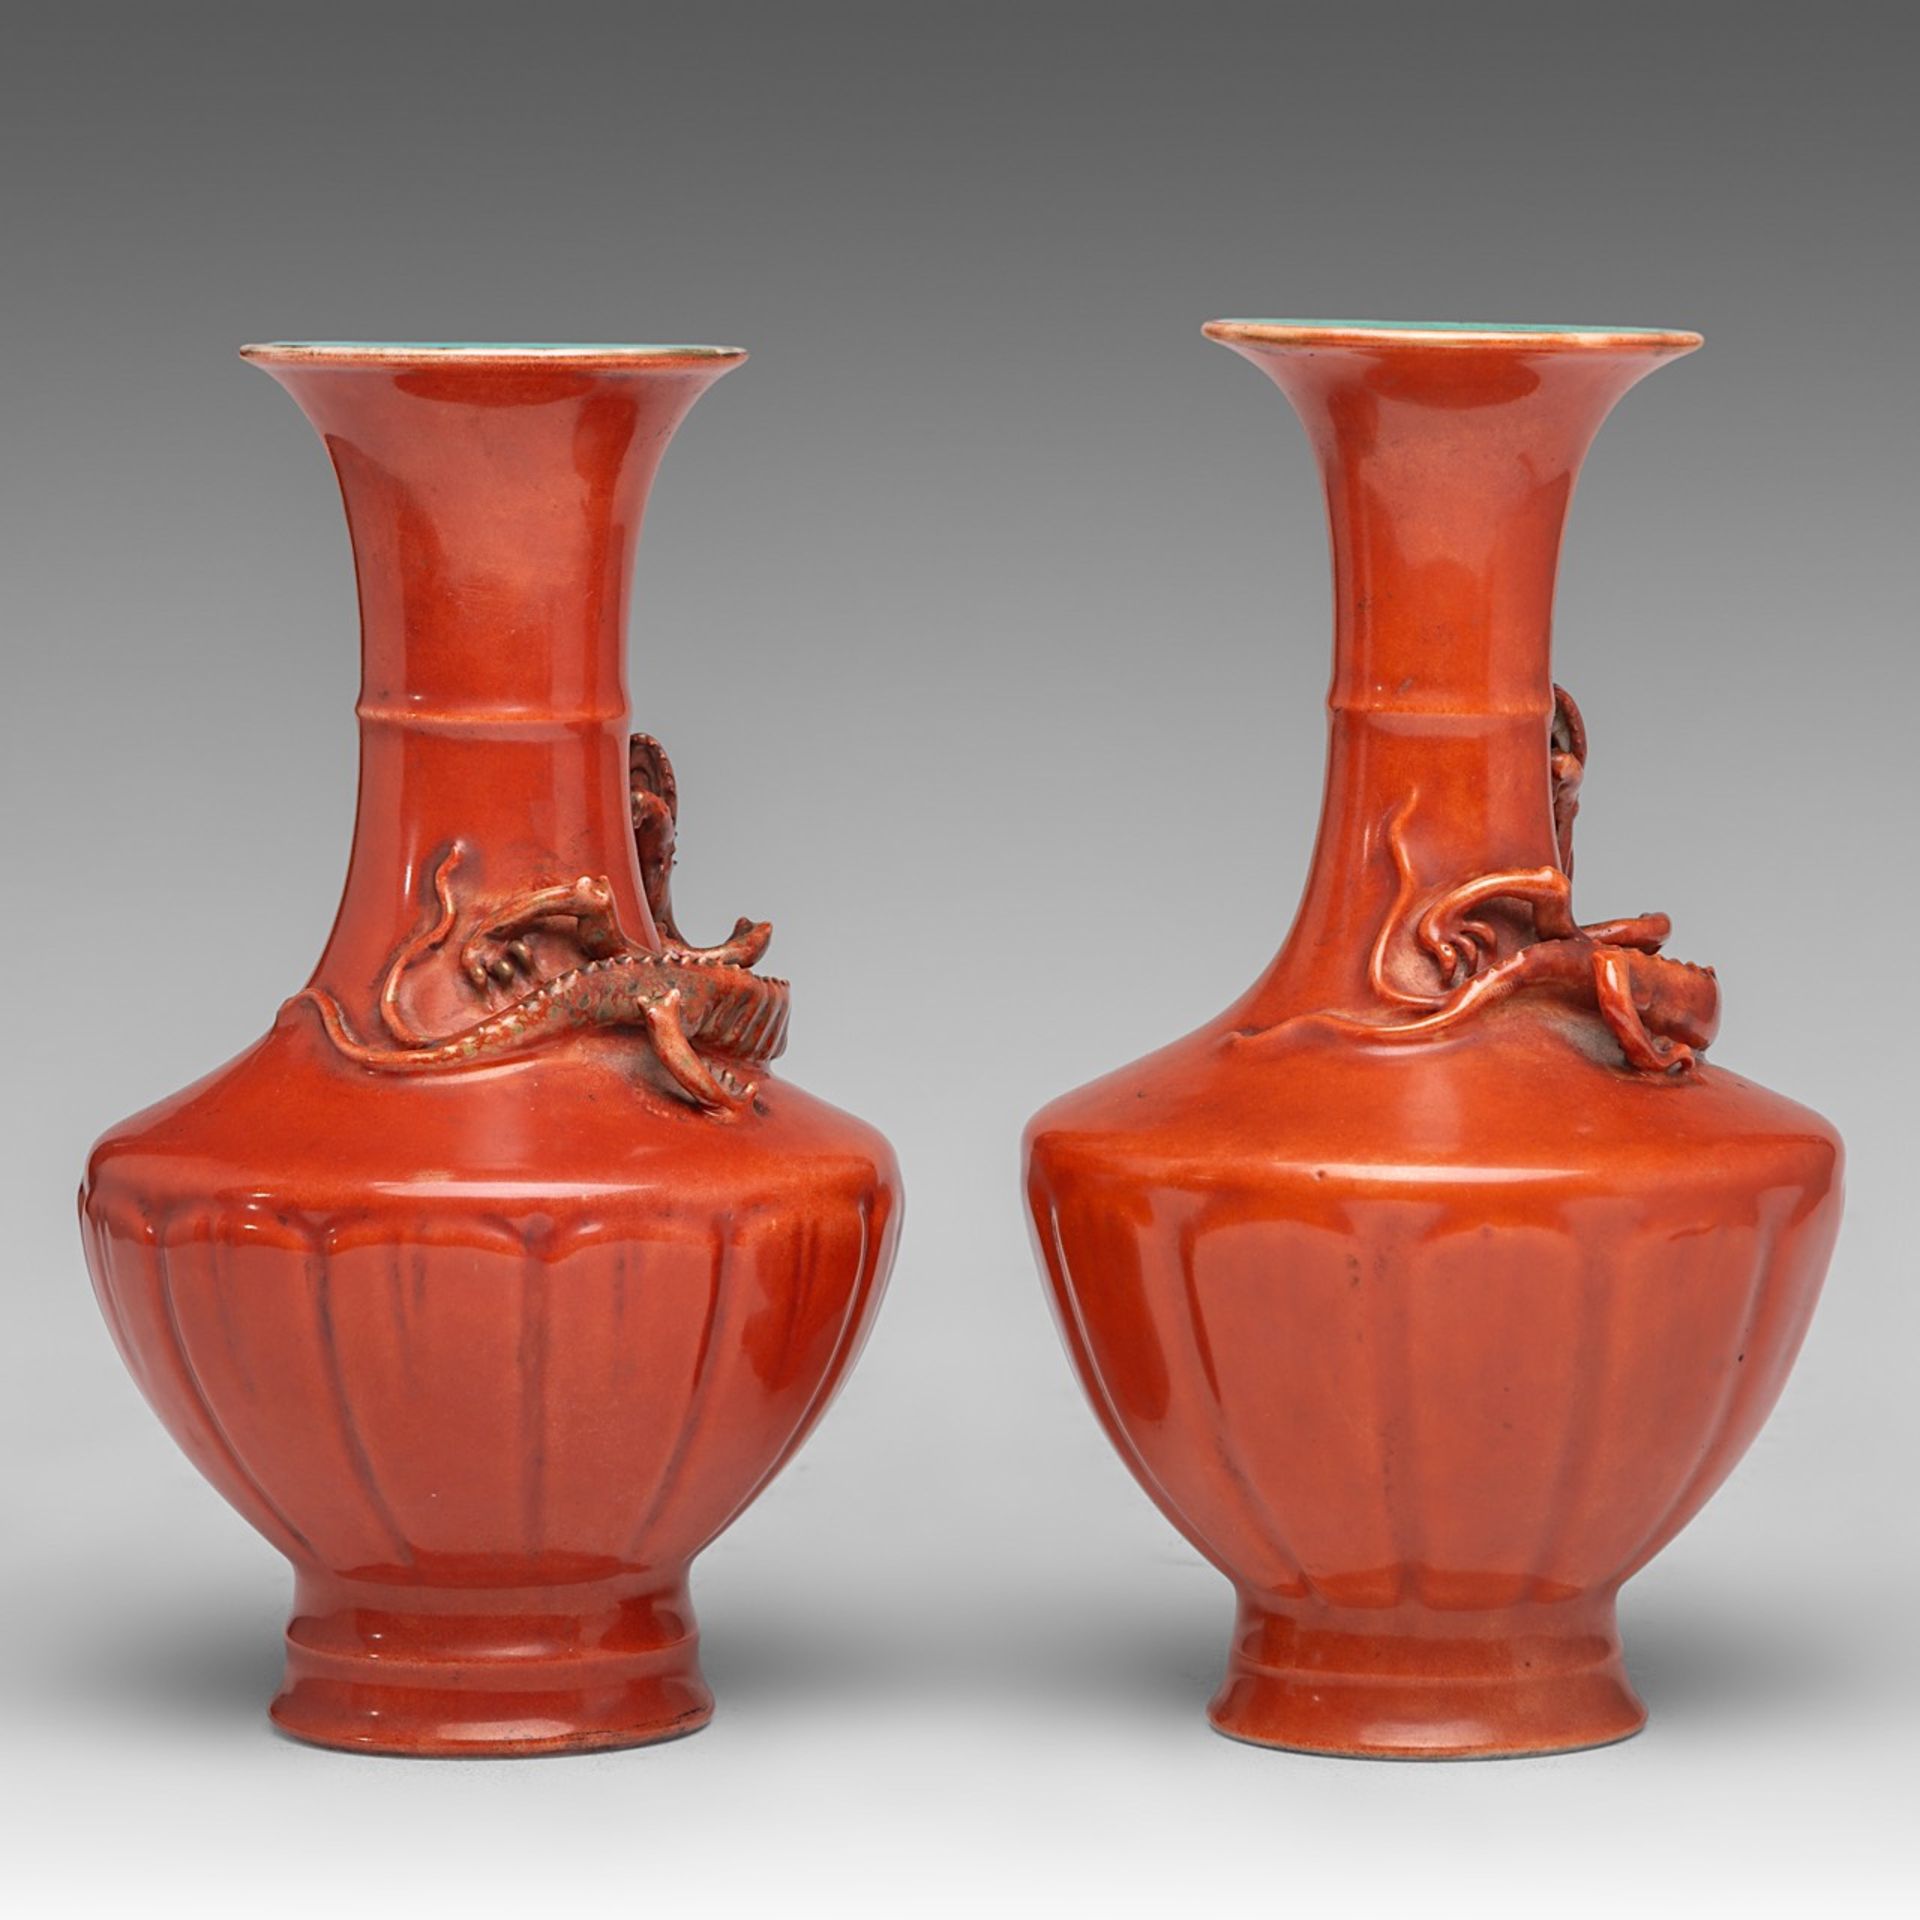 A similar pair of Chinese coral-red ground 'Dragon' vases, with a Qianlong mark, 19thC, H 19 - 19,5 - Bild 4 aus 6